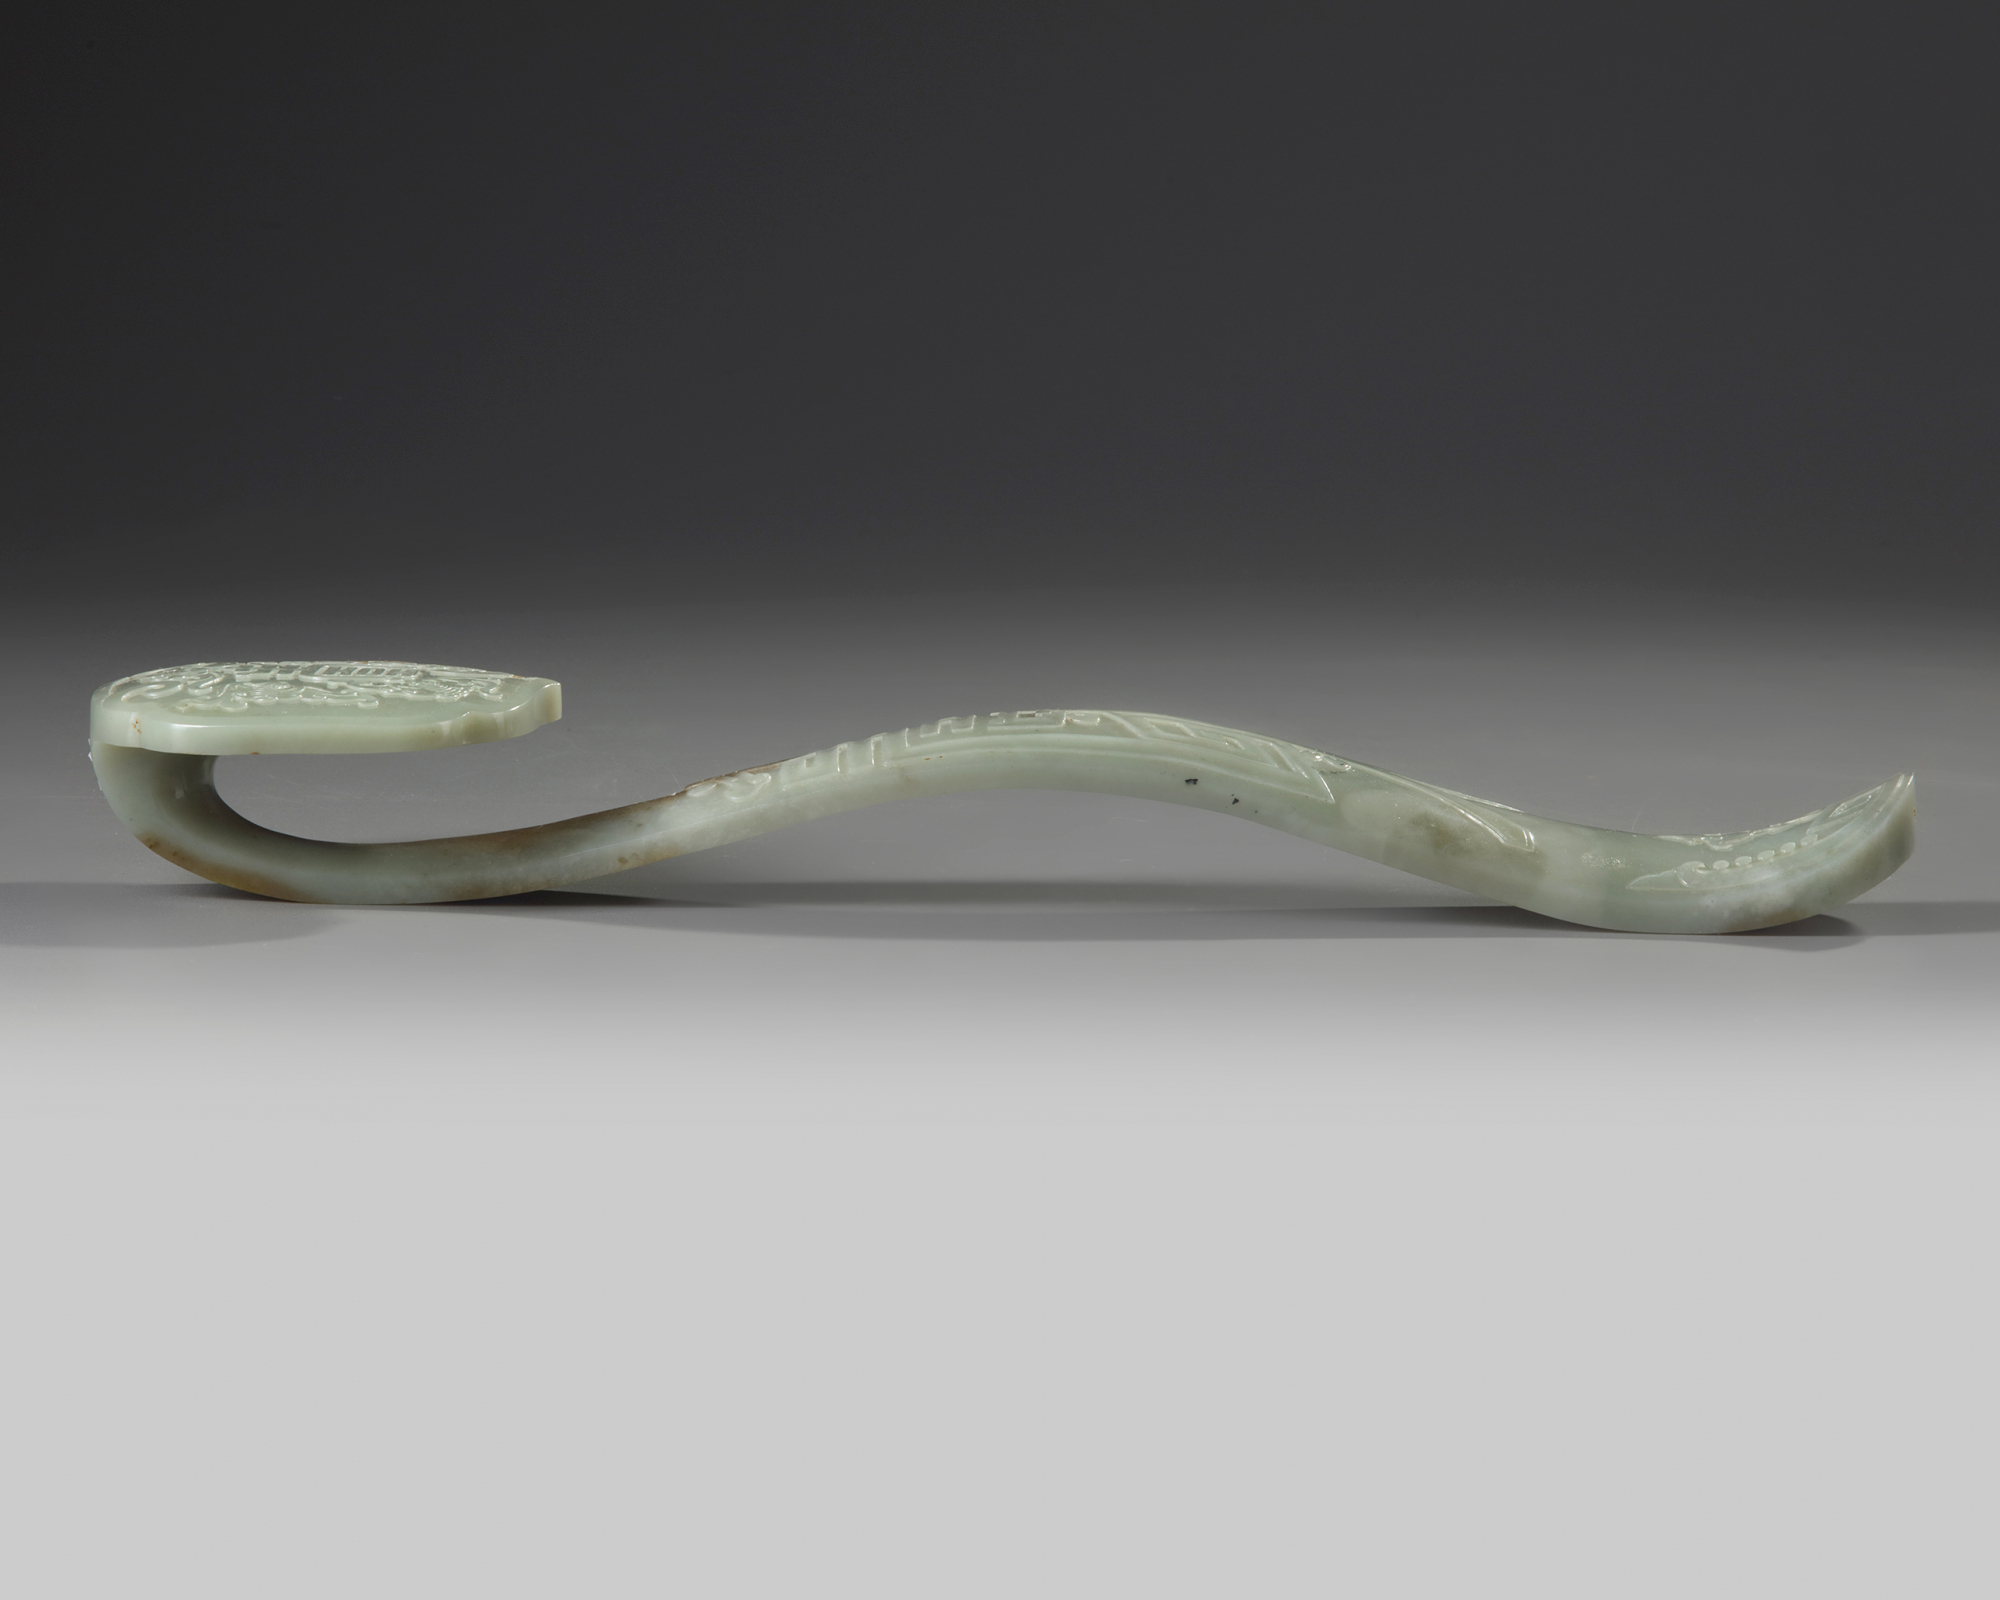 A Chinese pale celadon jade scepter - Image 2 of 4